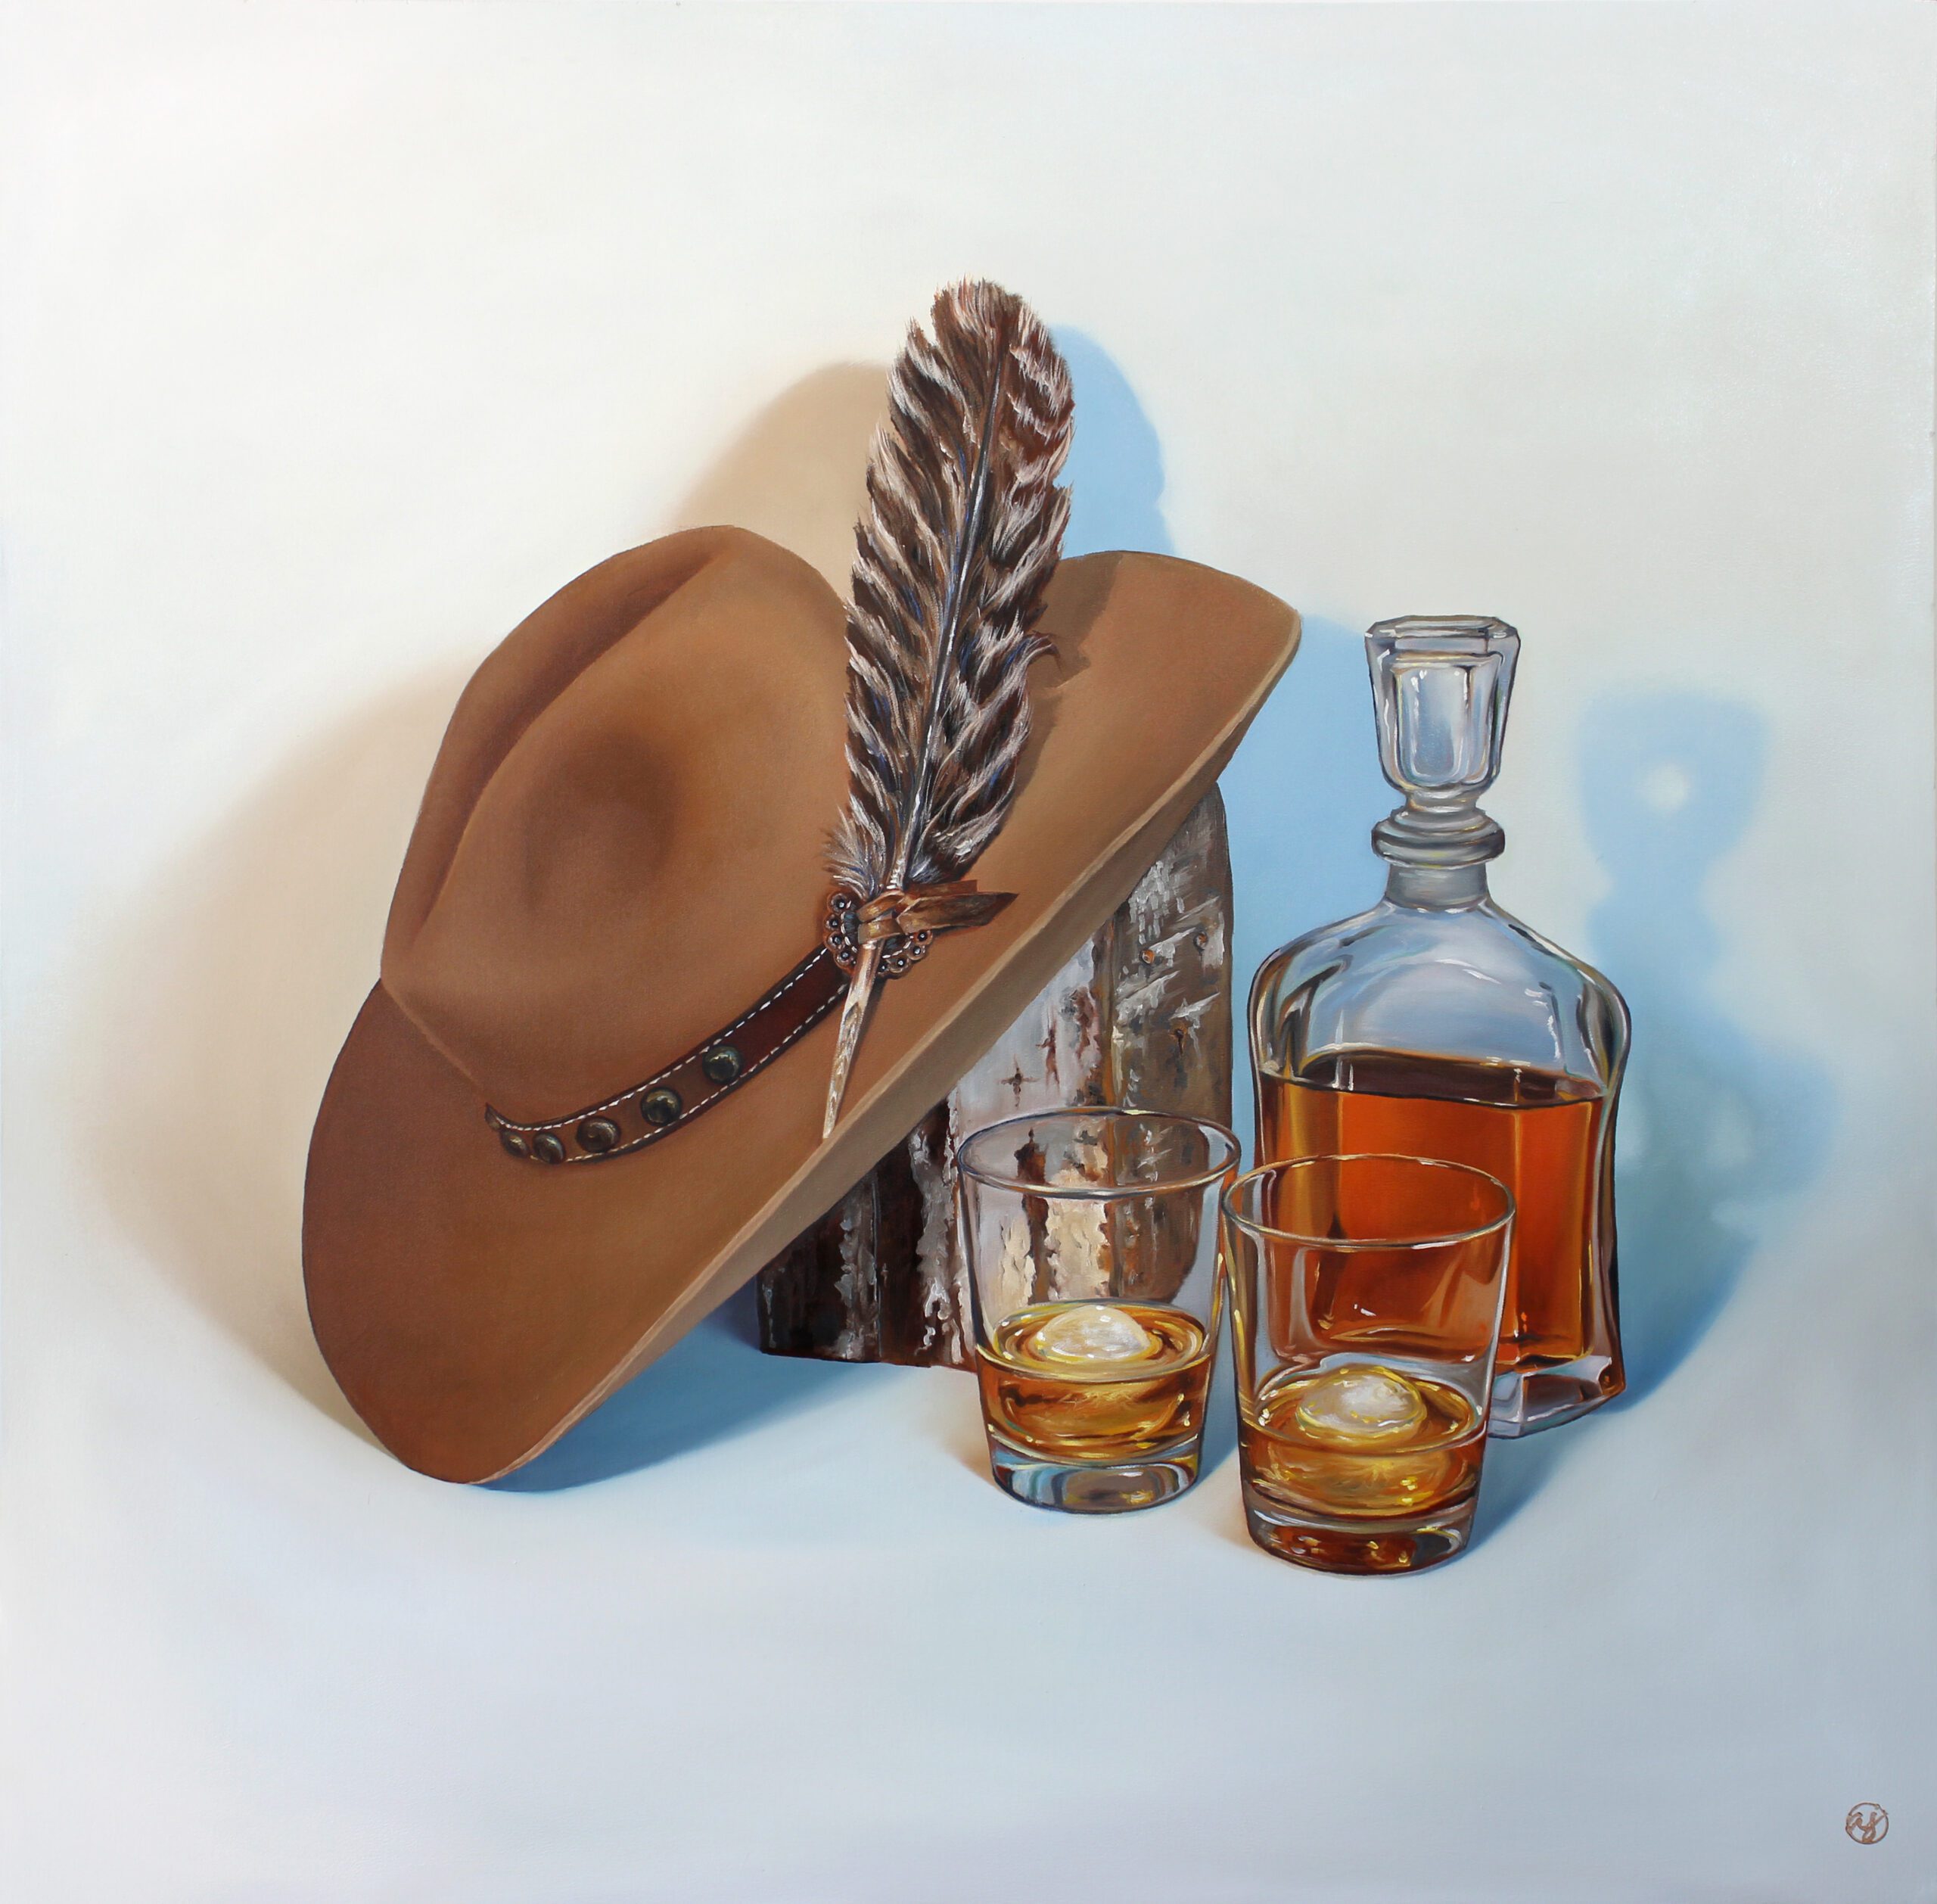 "Double Shot of Whiskey" 36x36 Original Oil Painting by Abra Johnson